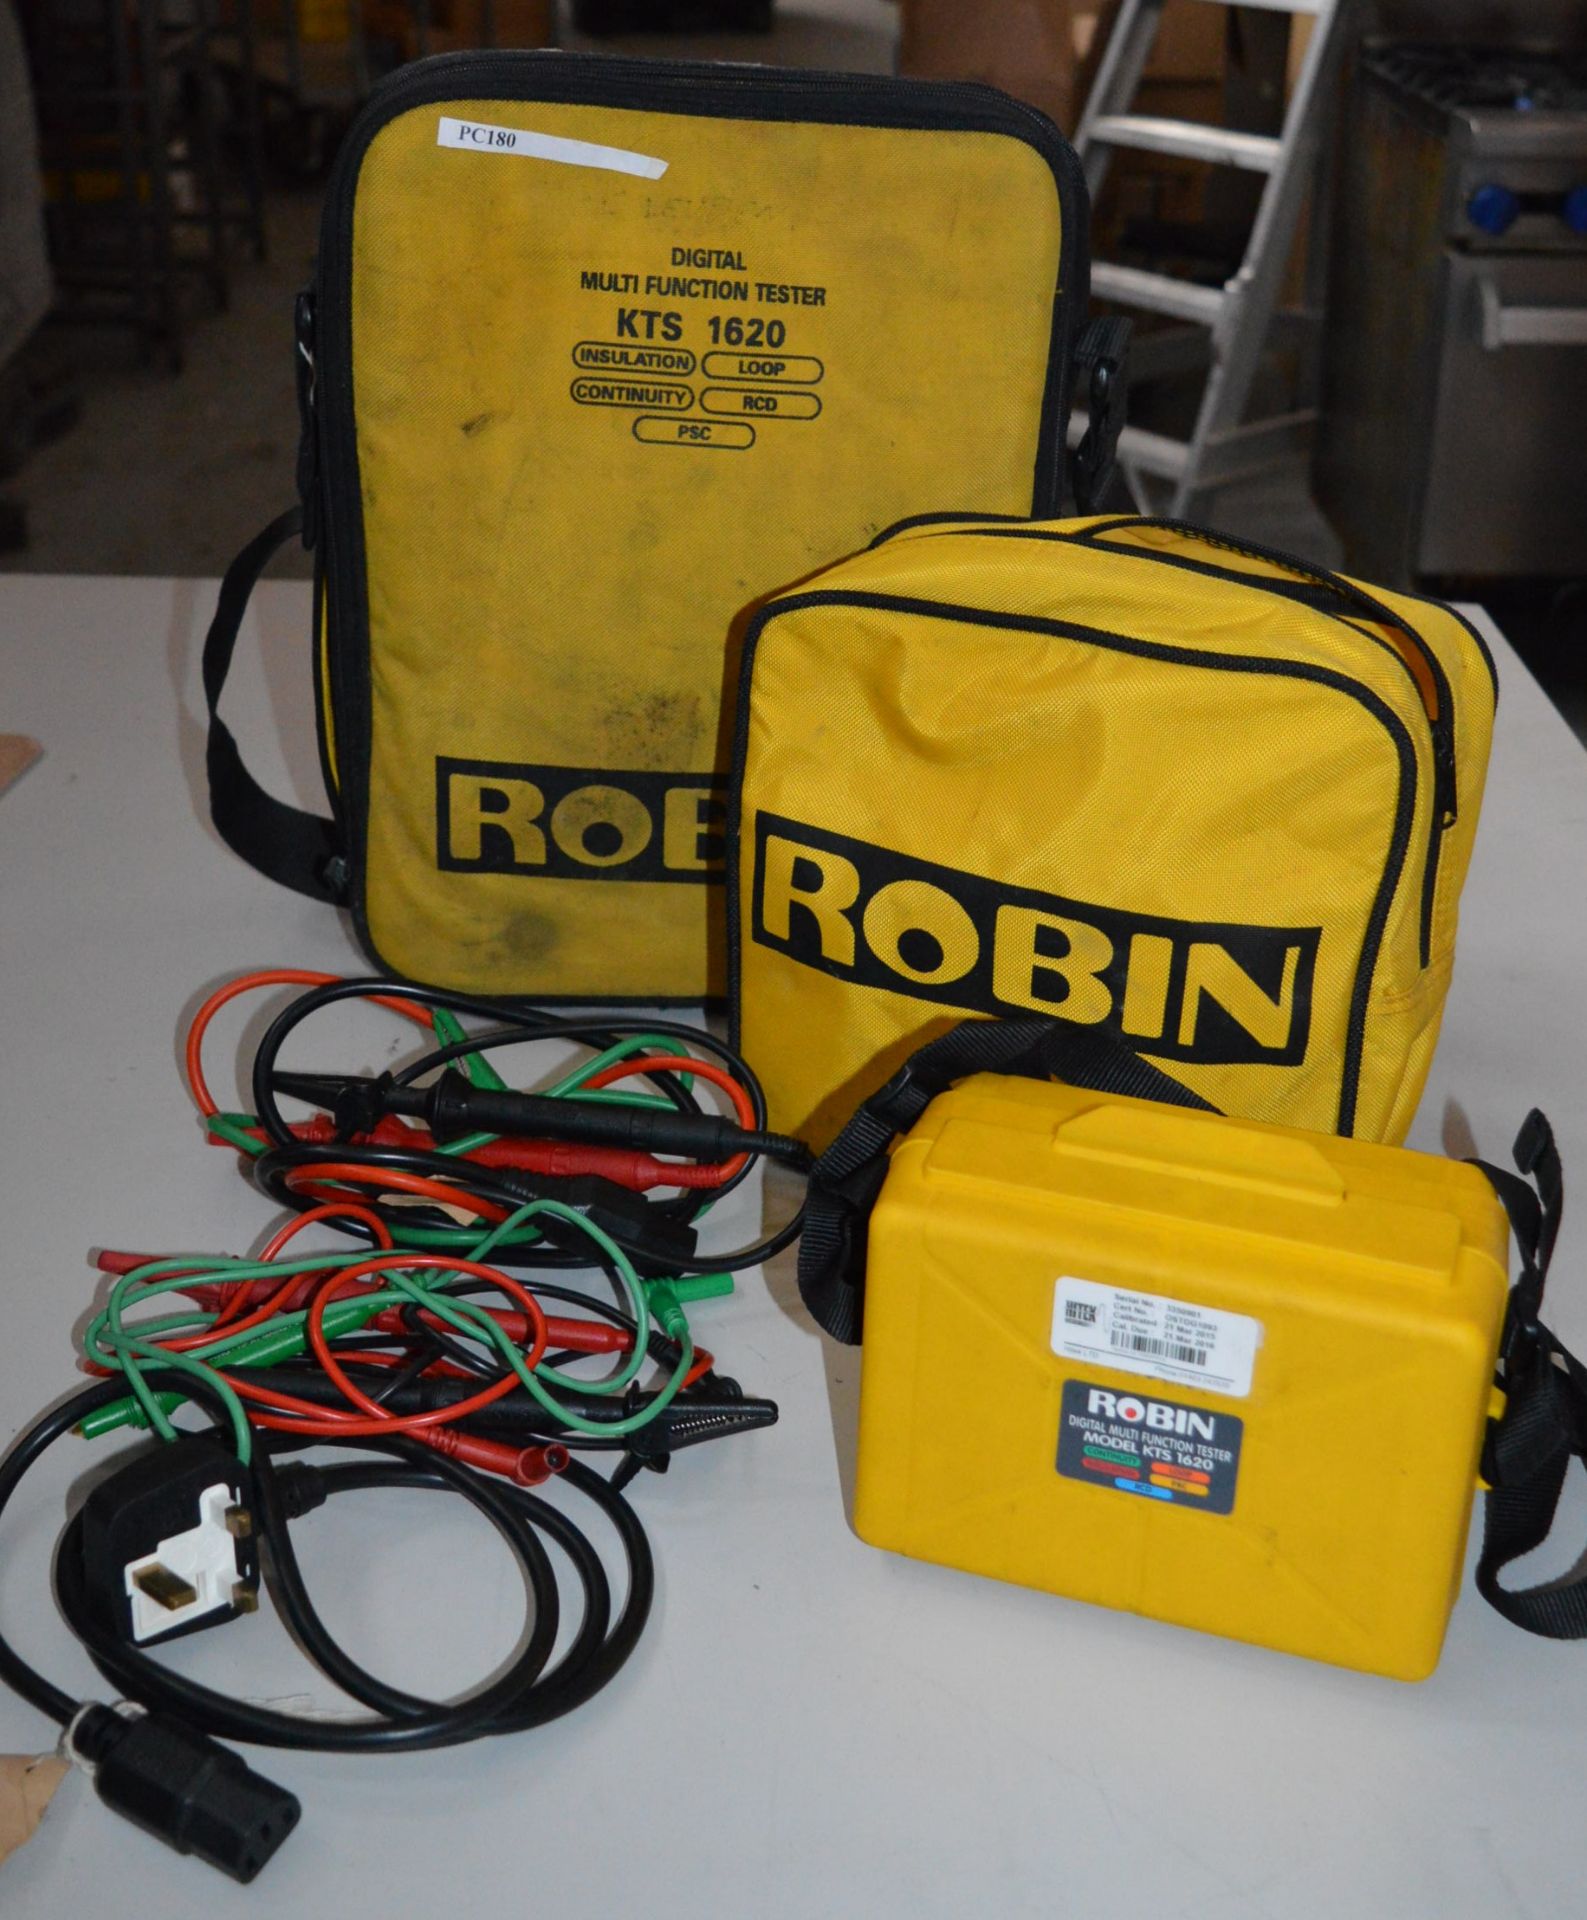 1 x Robin 5 in 1 Multi Function Tester - Model KTS 1620 - Includes Case and Cables - For The Testing - Image 2 of 8